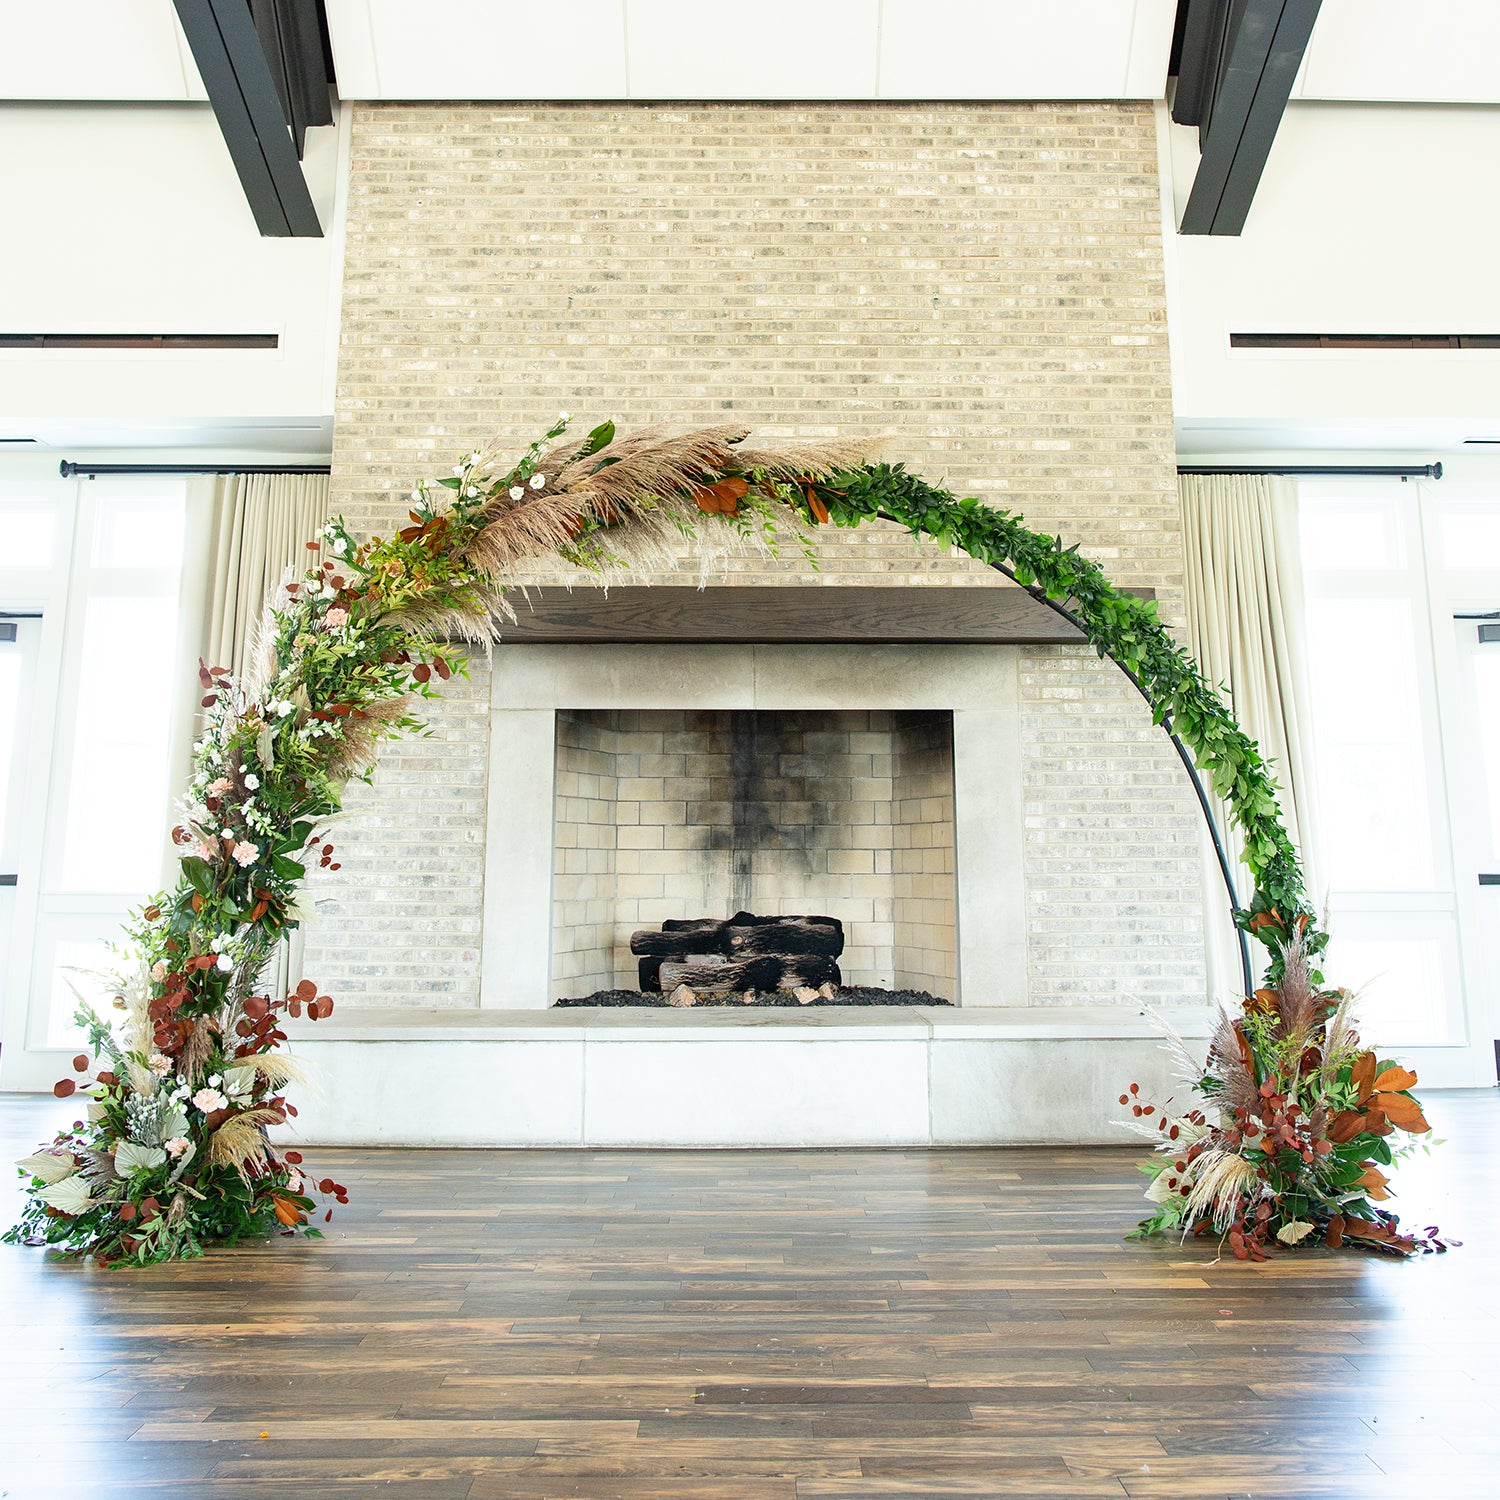 46 & Spruce round wedding arch: elegant half-circle floral design featuring natural greens, brown leaves, and soft flowers. Positioned in front of a fireplace indoors.